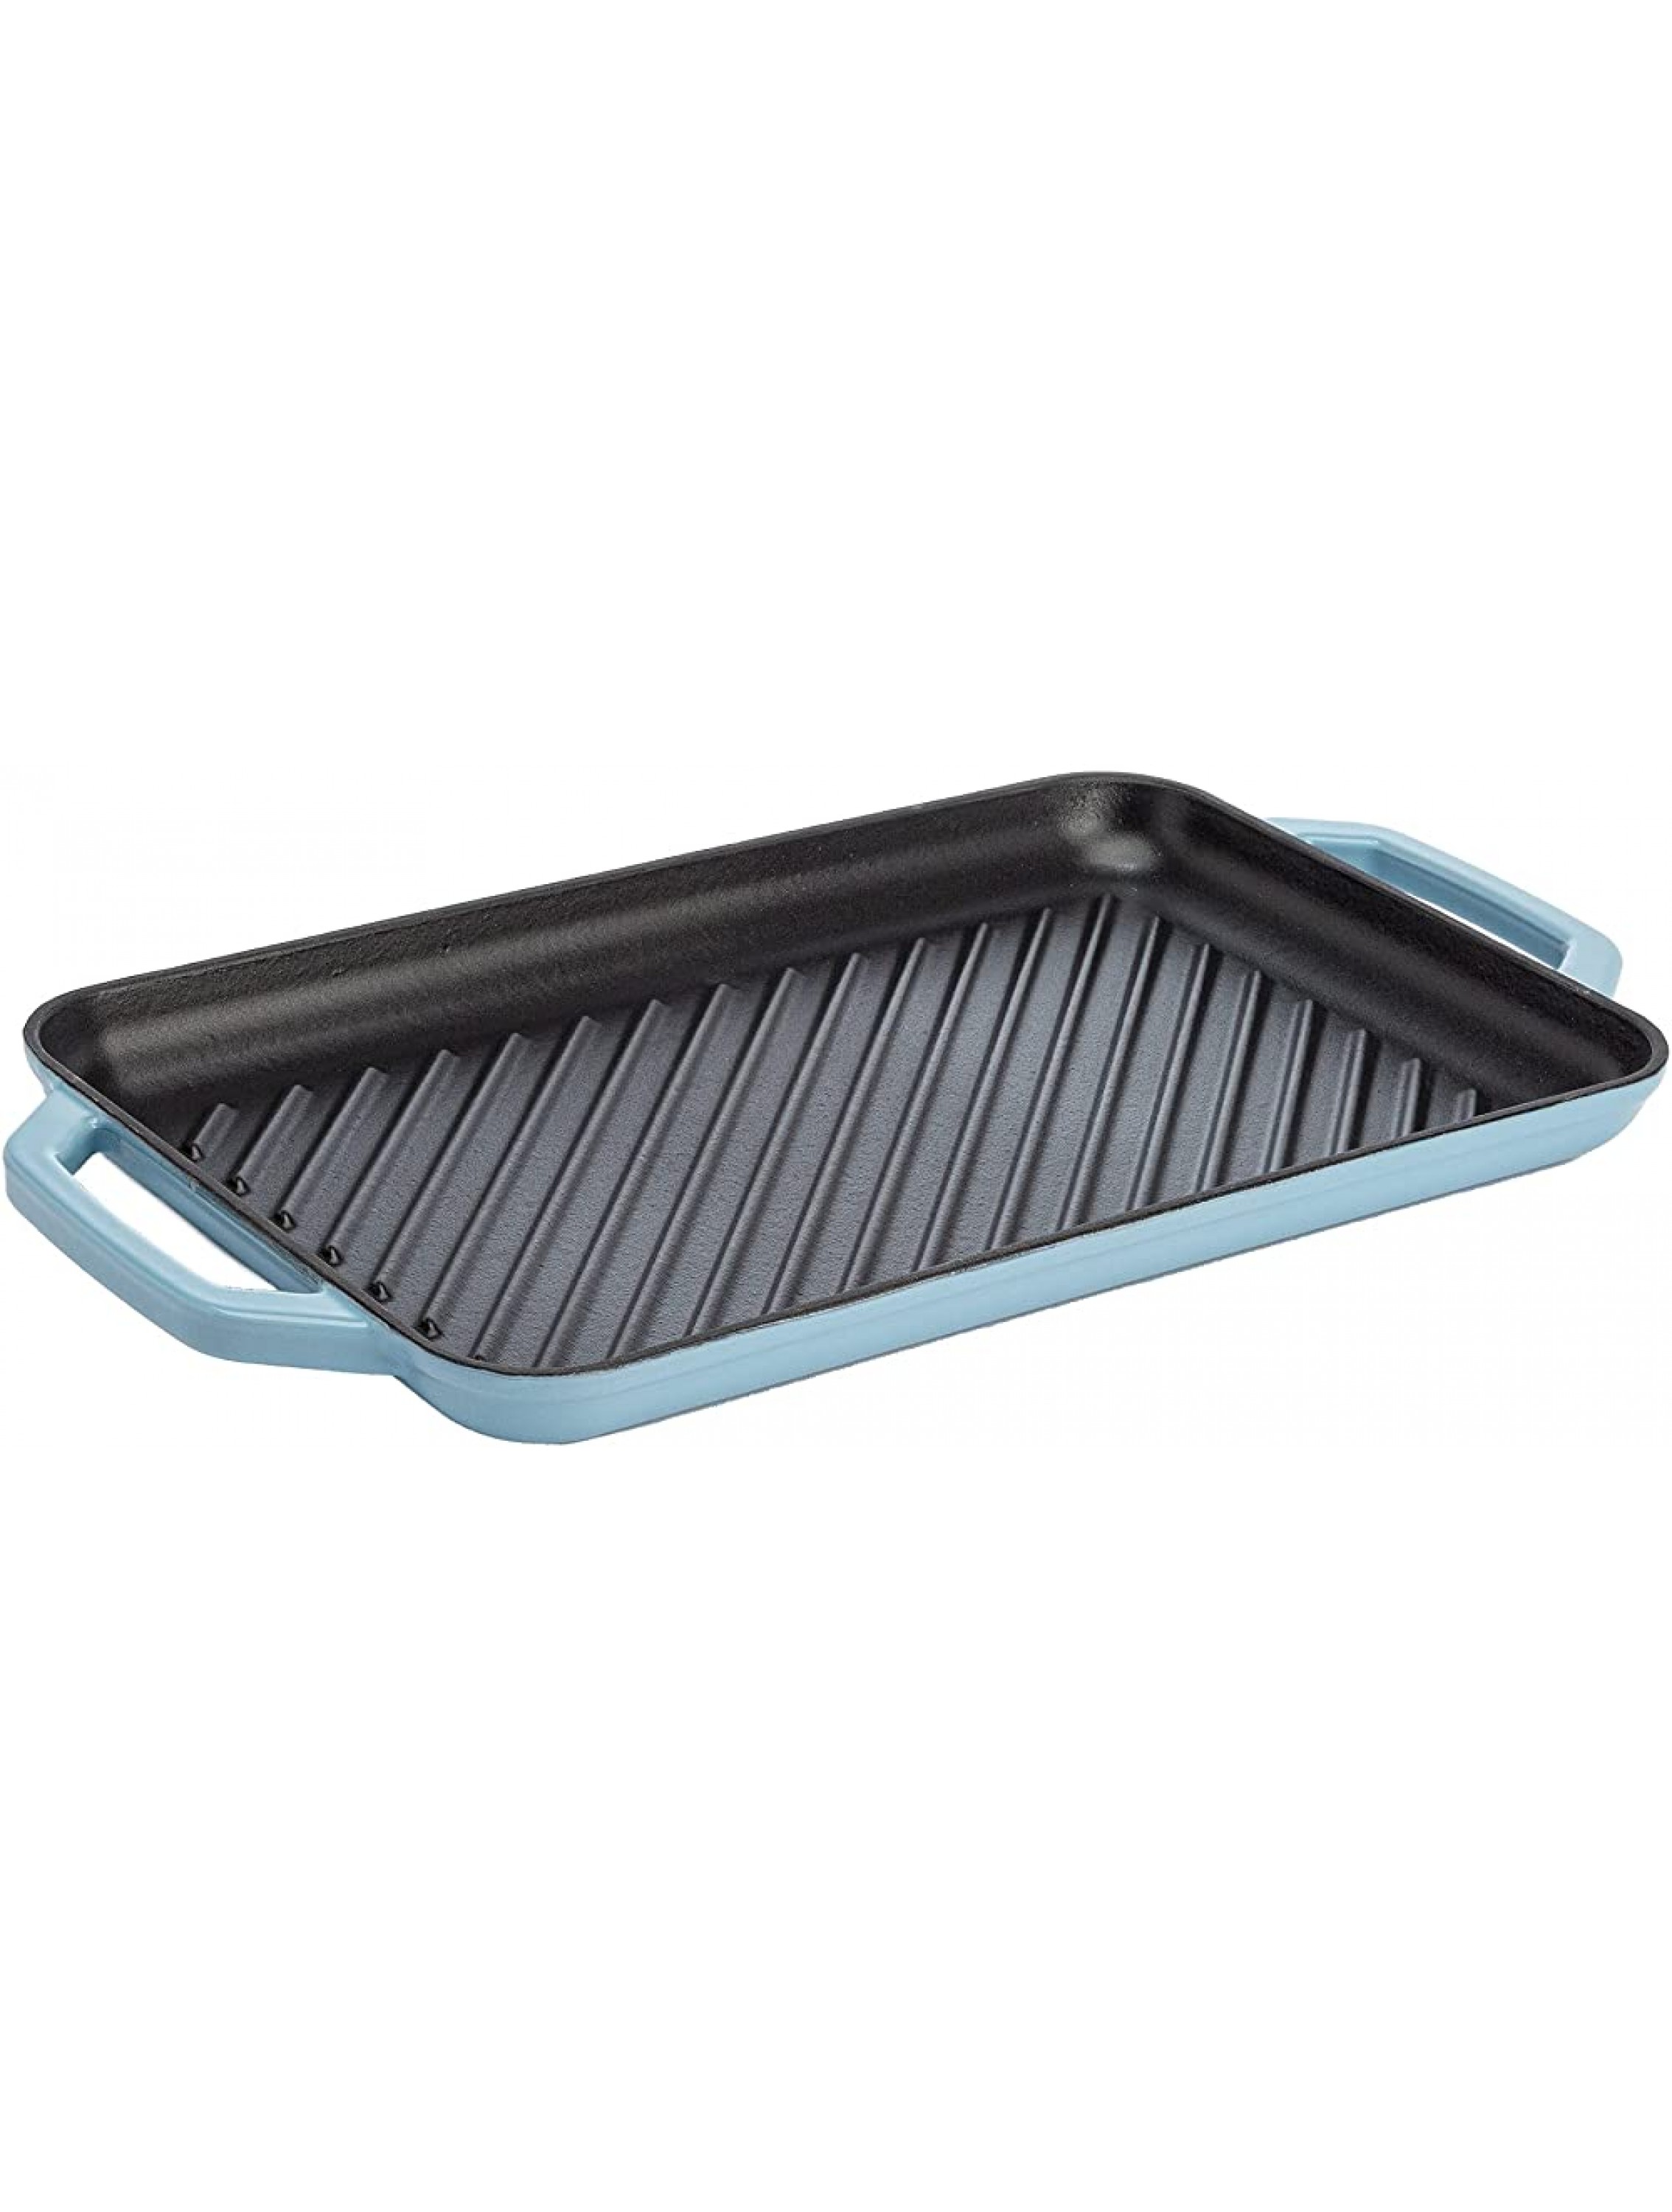 Country Living Enameled Cast Iron Double Burner Grill Pan Family Sized Rectagular Griddle Durable Indoor and Outdoor Cookware 17 x 9.5 Blue - B2D95U6Q8